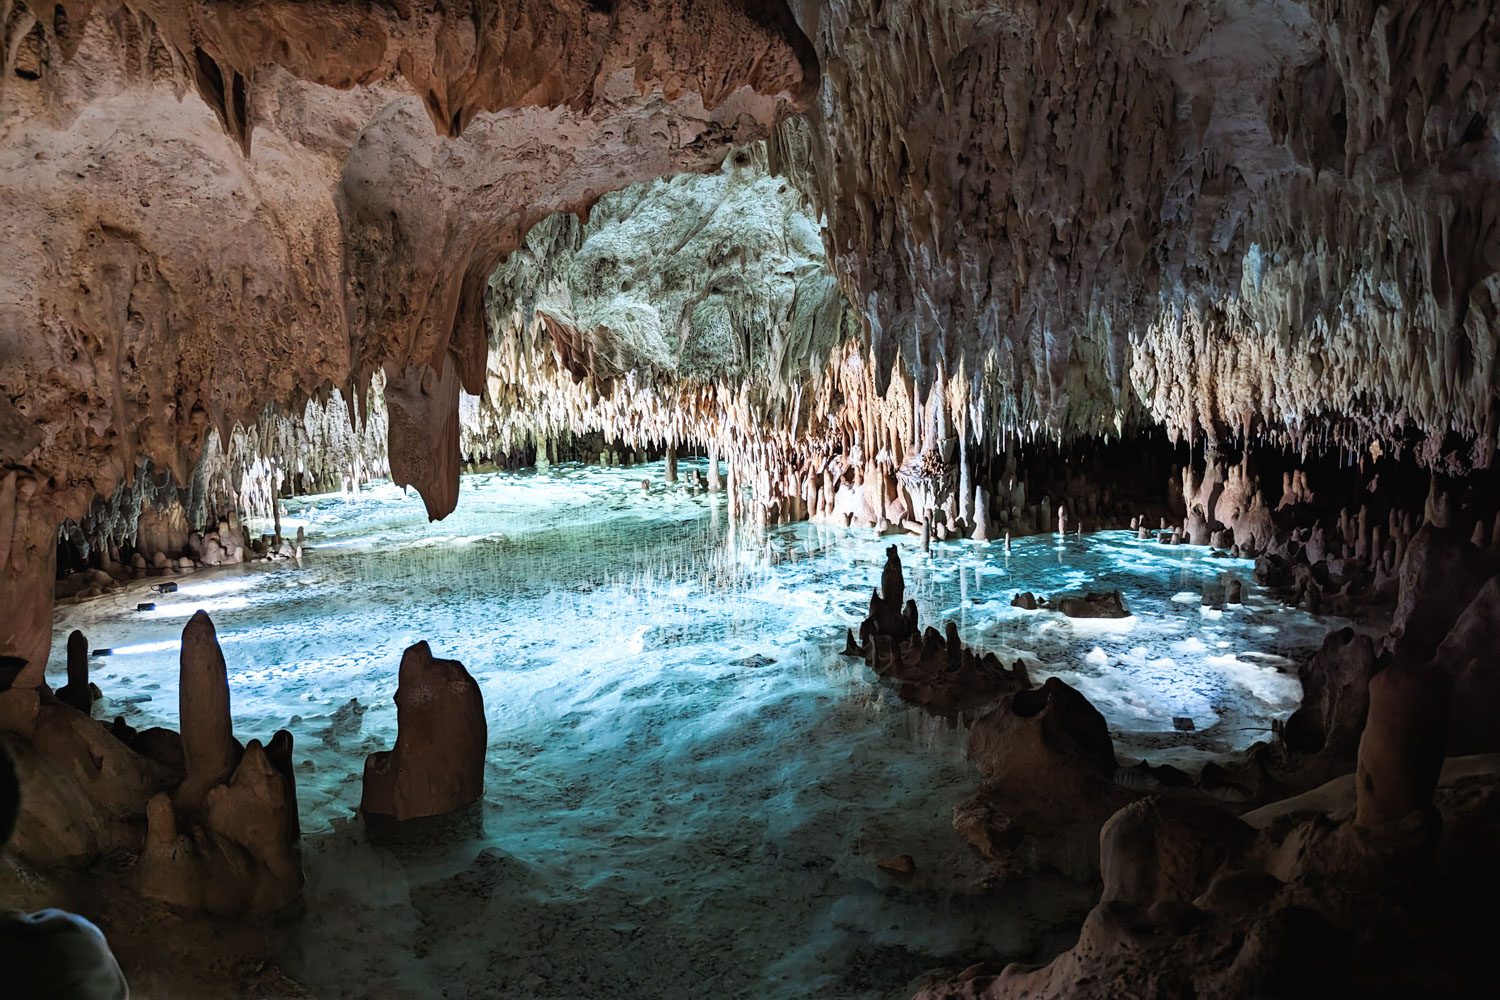 Cayman Crystal Caves in Grand Cayman